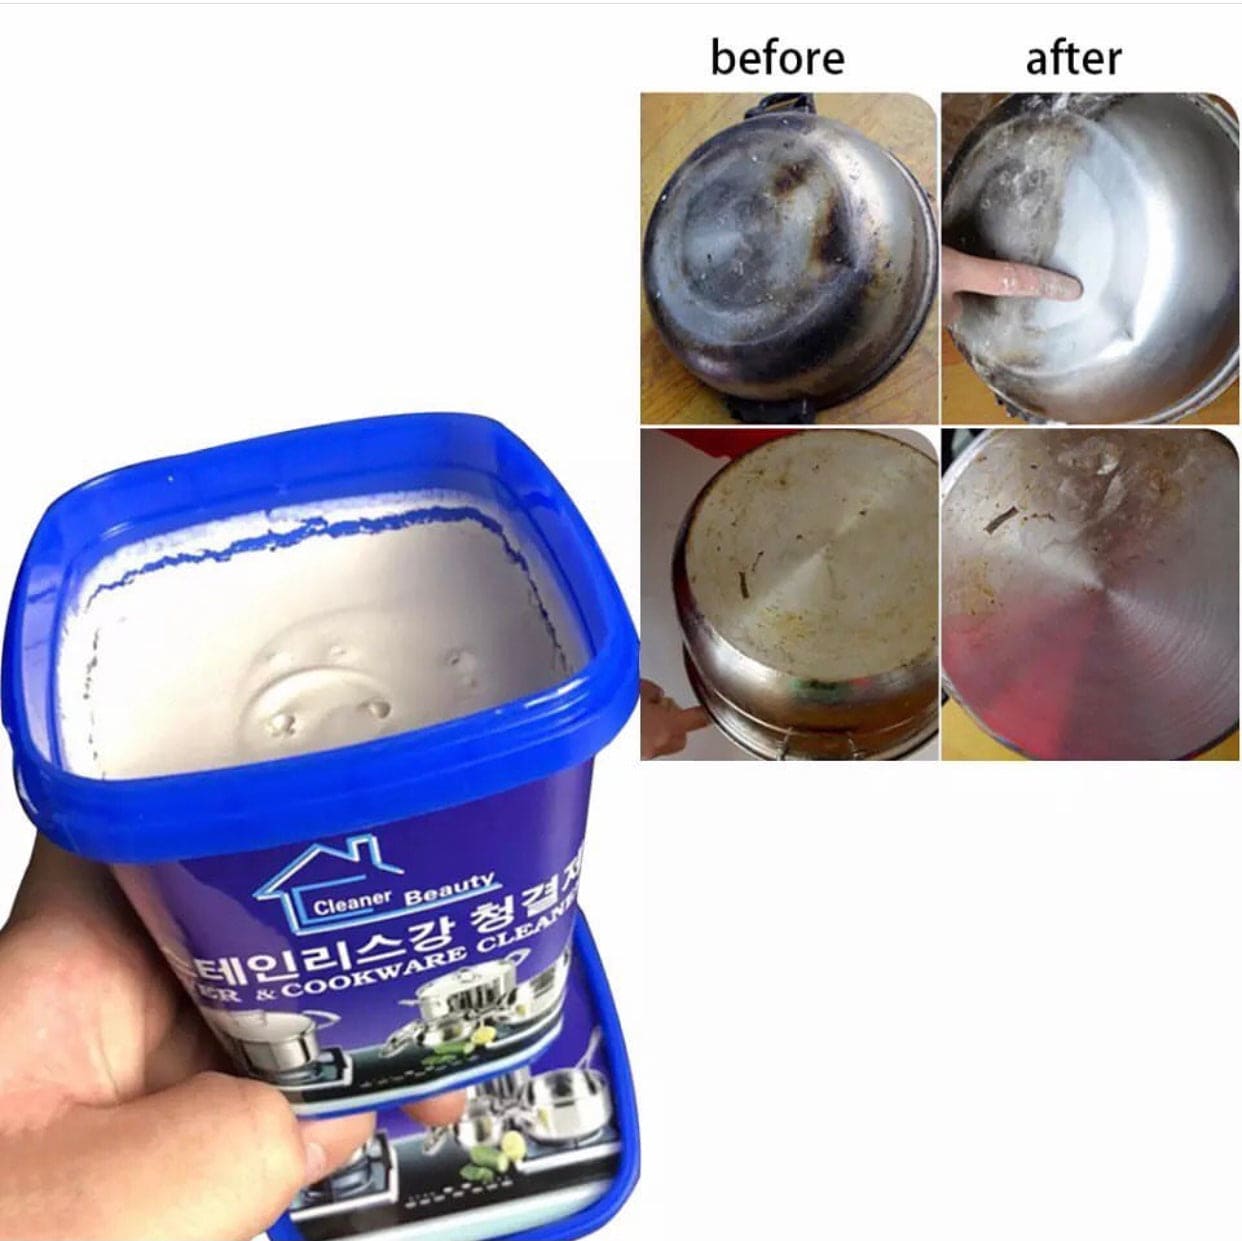 500Gm Powerful Rust Remover Stainless Steel Pot Cleaning Paste, Kitchenwar Stain Dirt Cleaner, Powerful Stainless Steel Cookware Cleaning Paste